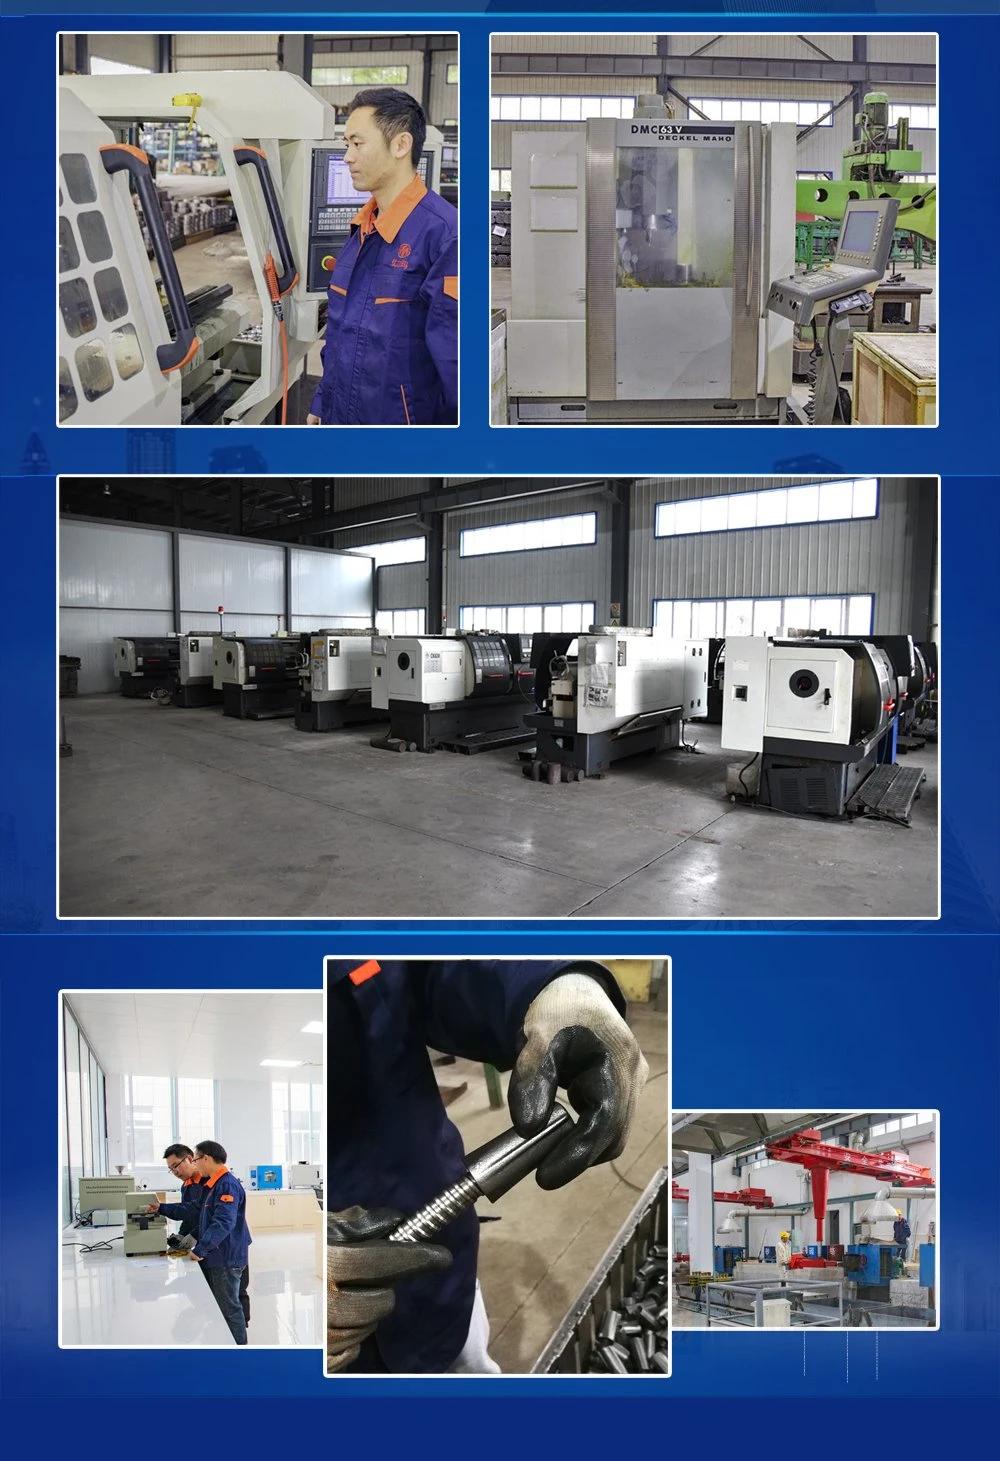 Machining, Casting, Construction, Mining, Equipment, Substation, Wire System